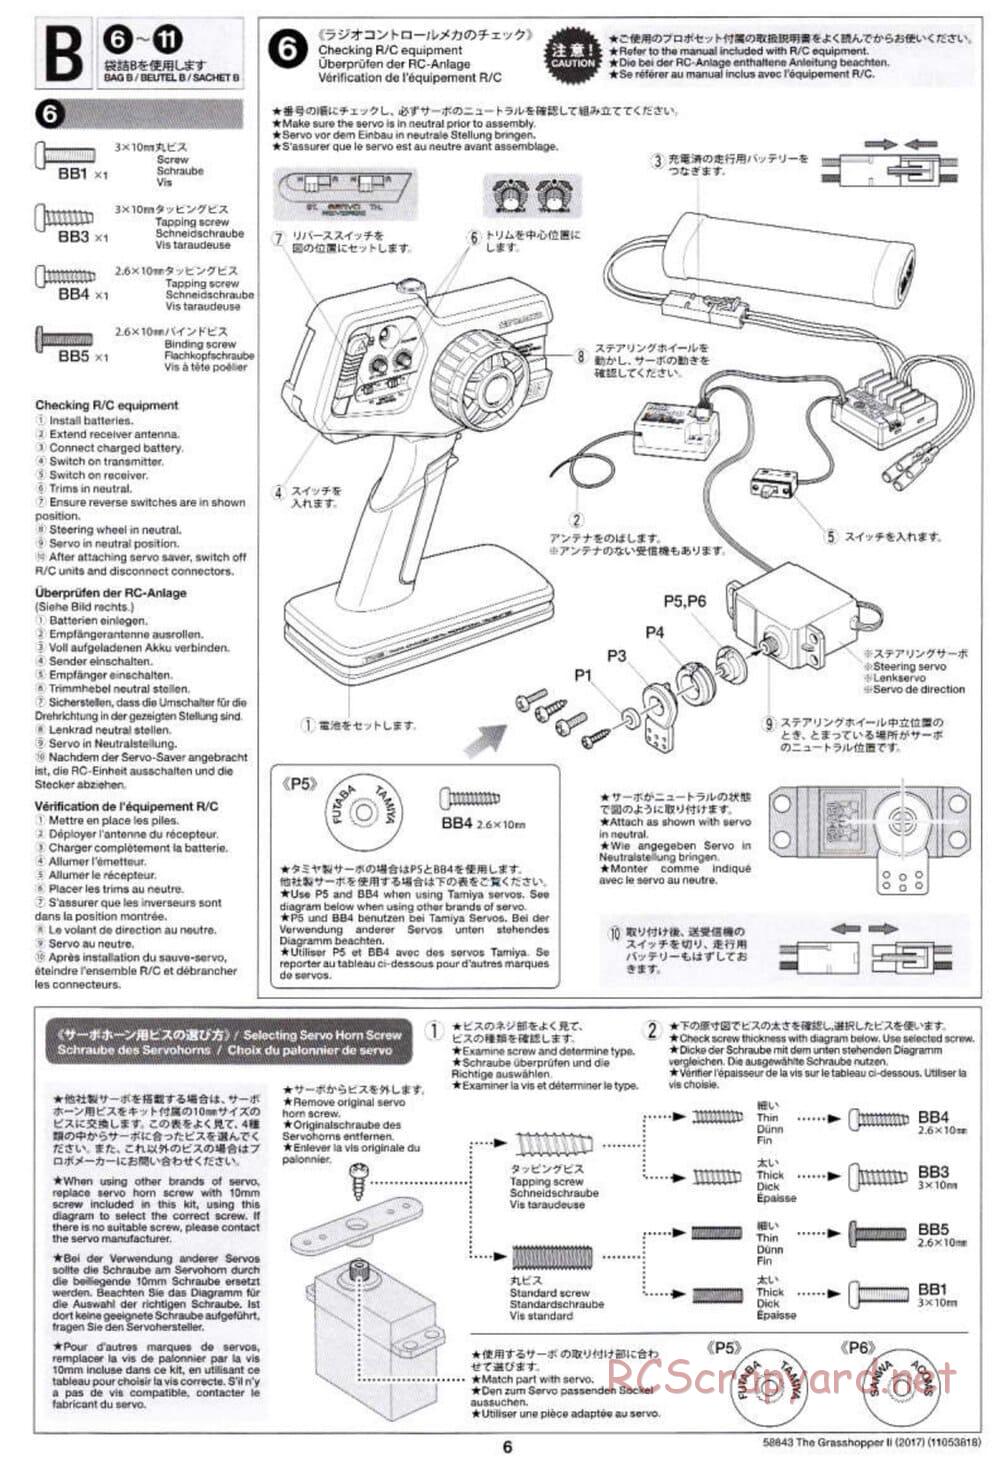 Tamiya - The Grasshopper II (2017) - GH Chassis - Manual - Page 6